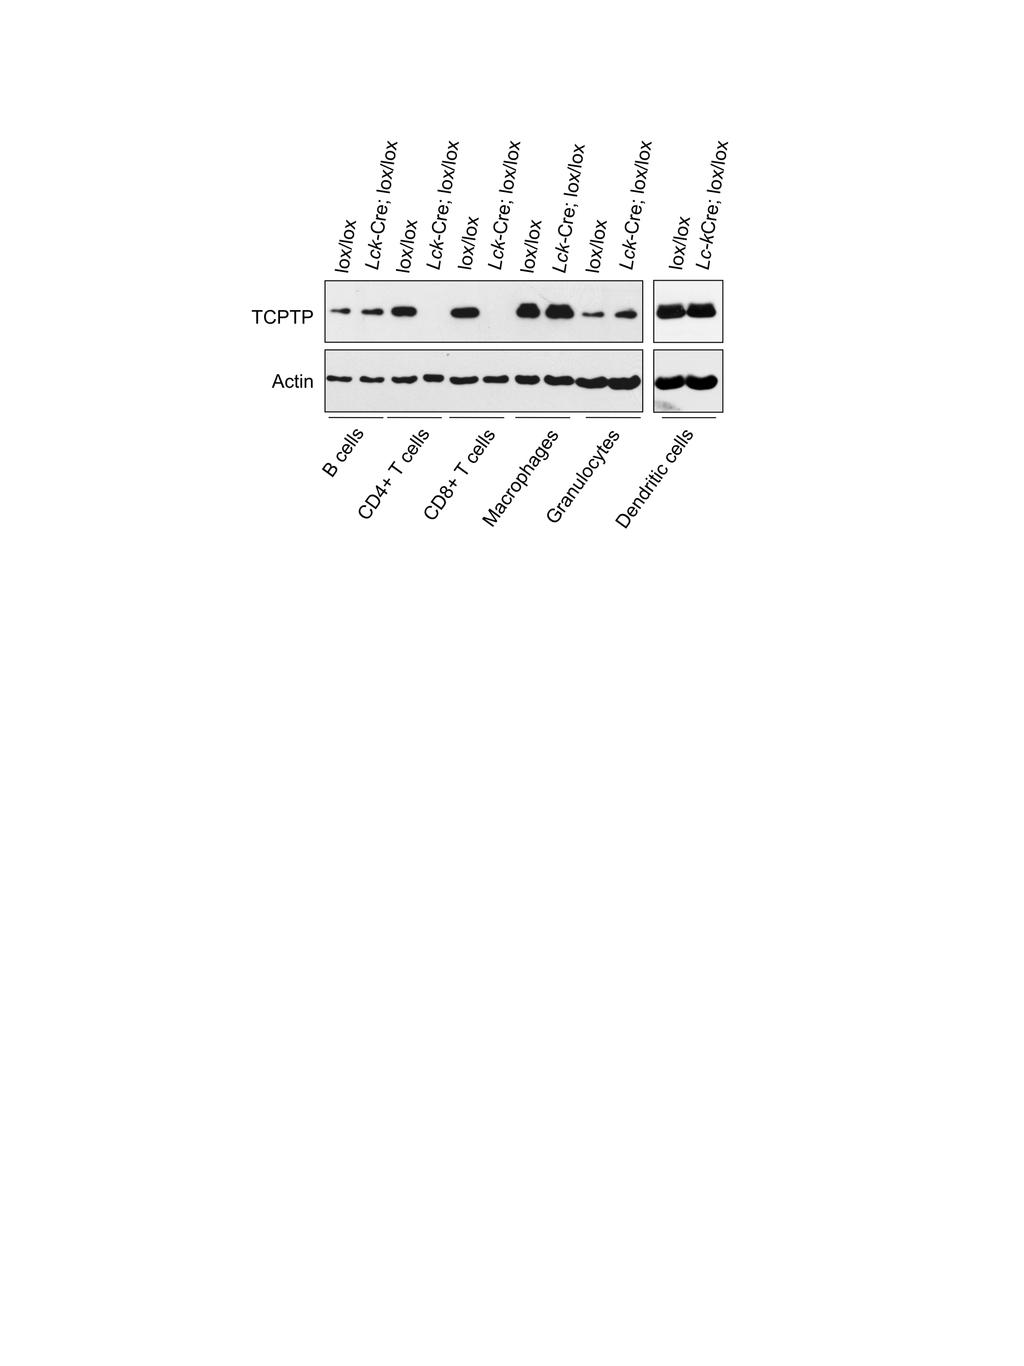 Supplementary Figure 15. TCPTP expression in aged mice.